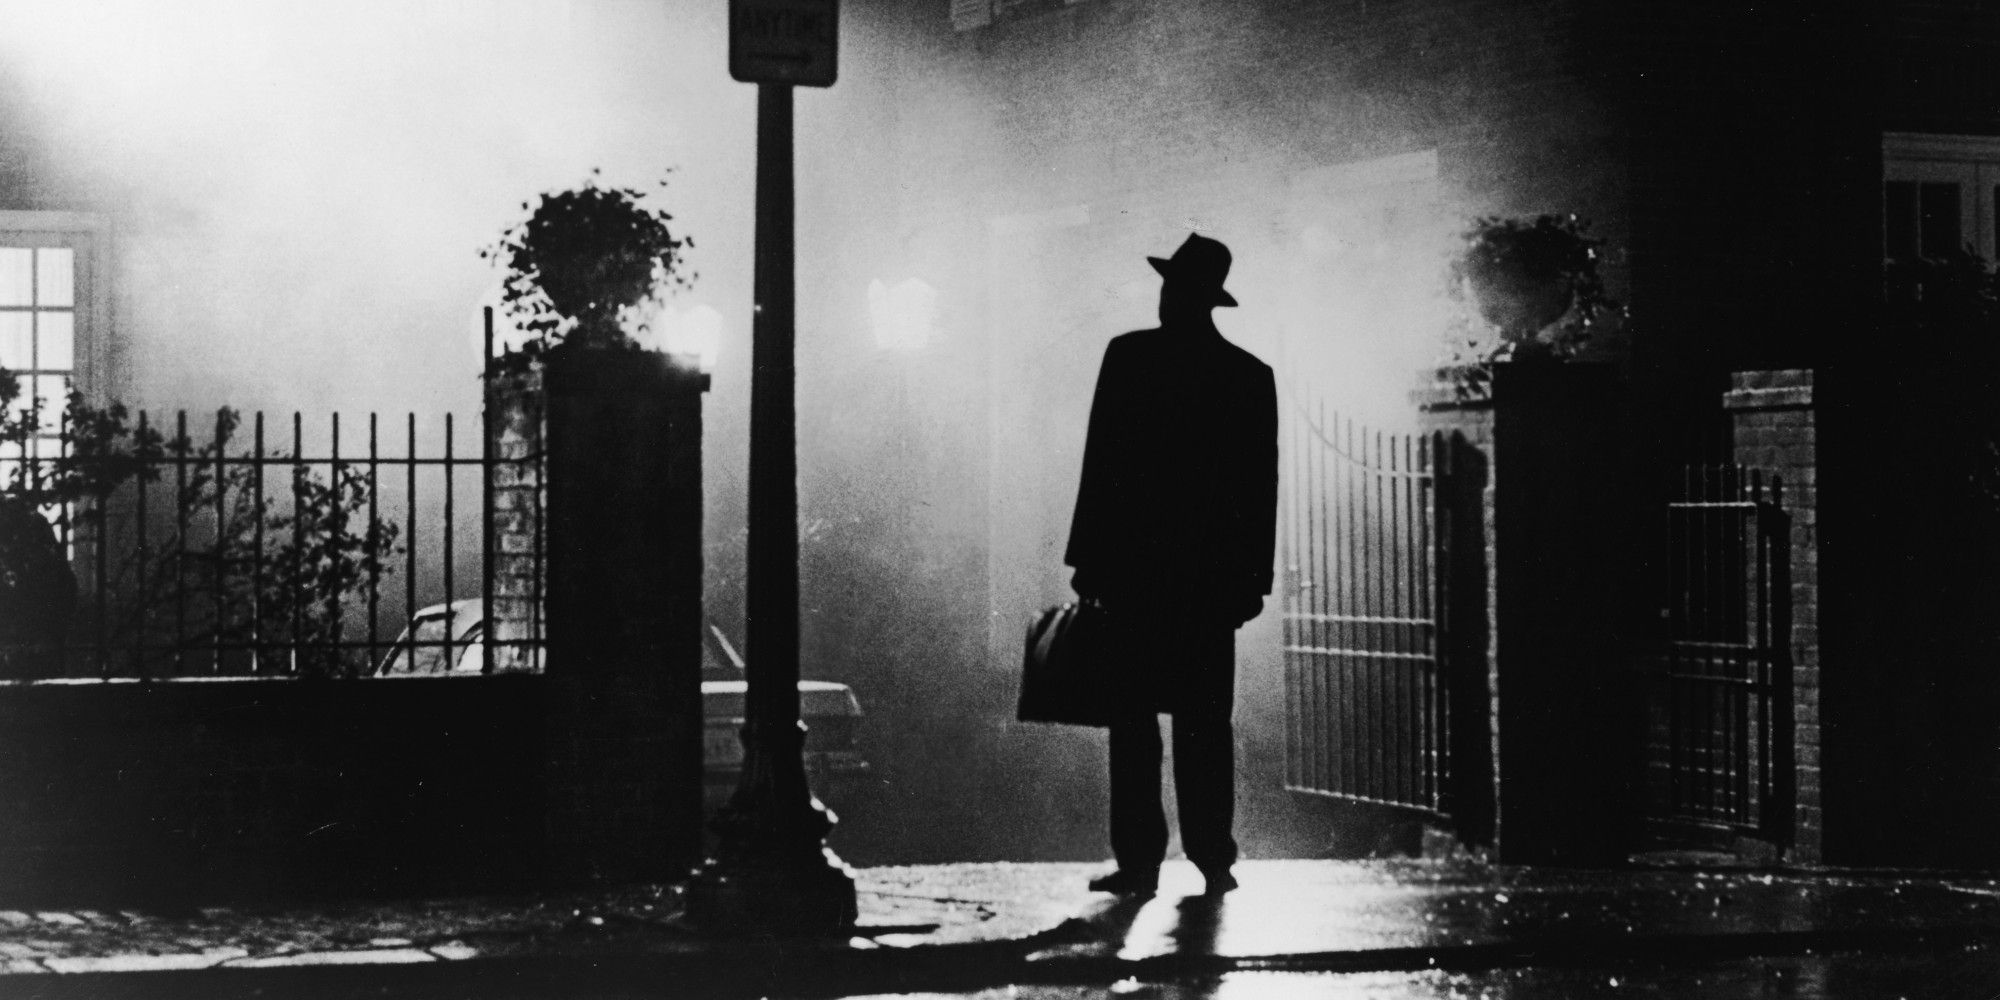 Father Merrin stands outside the house in The Exorcist